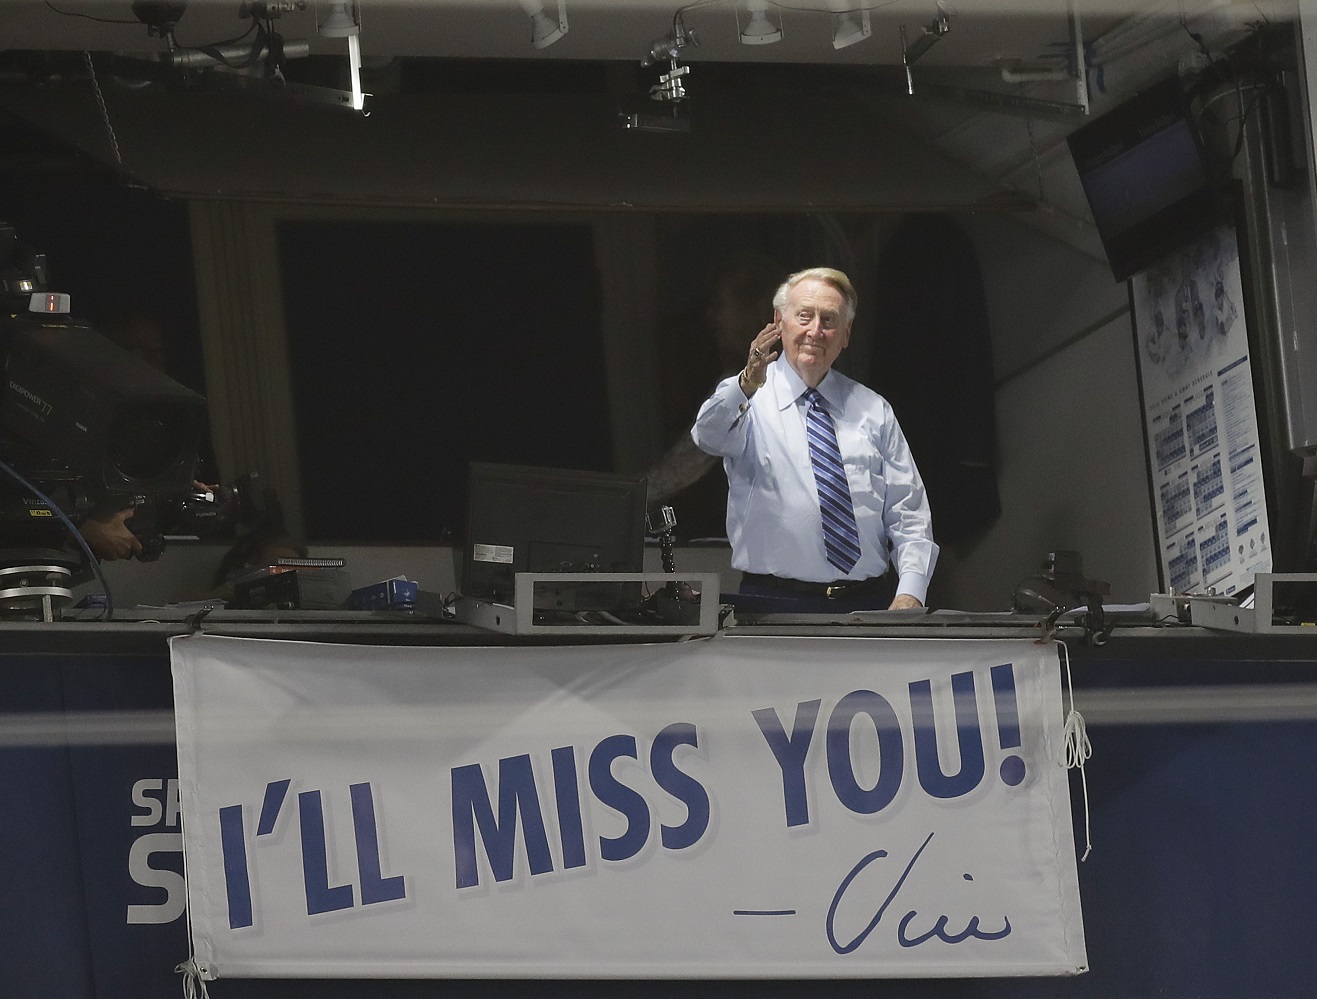 Los Angeles Dodgers broadcaster Vin Scully gestures in his booth during a baseball game between the Los Angeles Dodgers and the Colorado Rockies, Friday, Sept. 23, 2016, in Los Angeles. Scully's final game at Dodger Stadium will be Sunday against the Rockies. (AP Photo/Jae C. Hong)